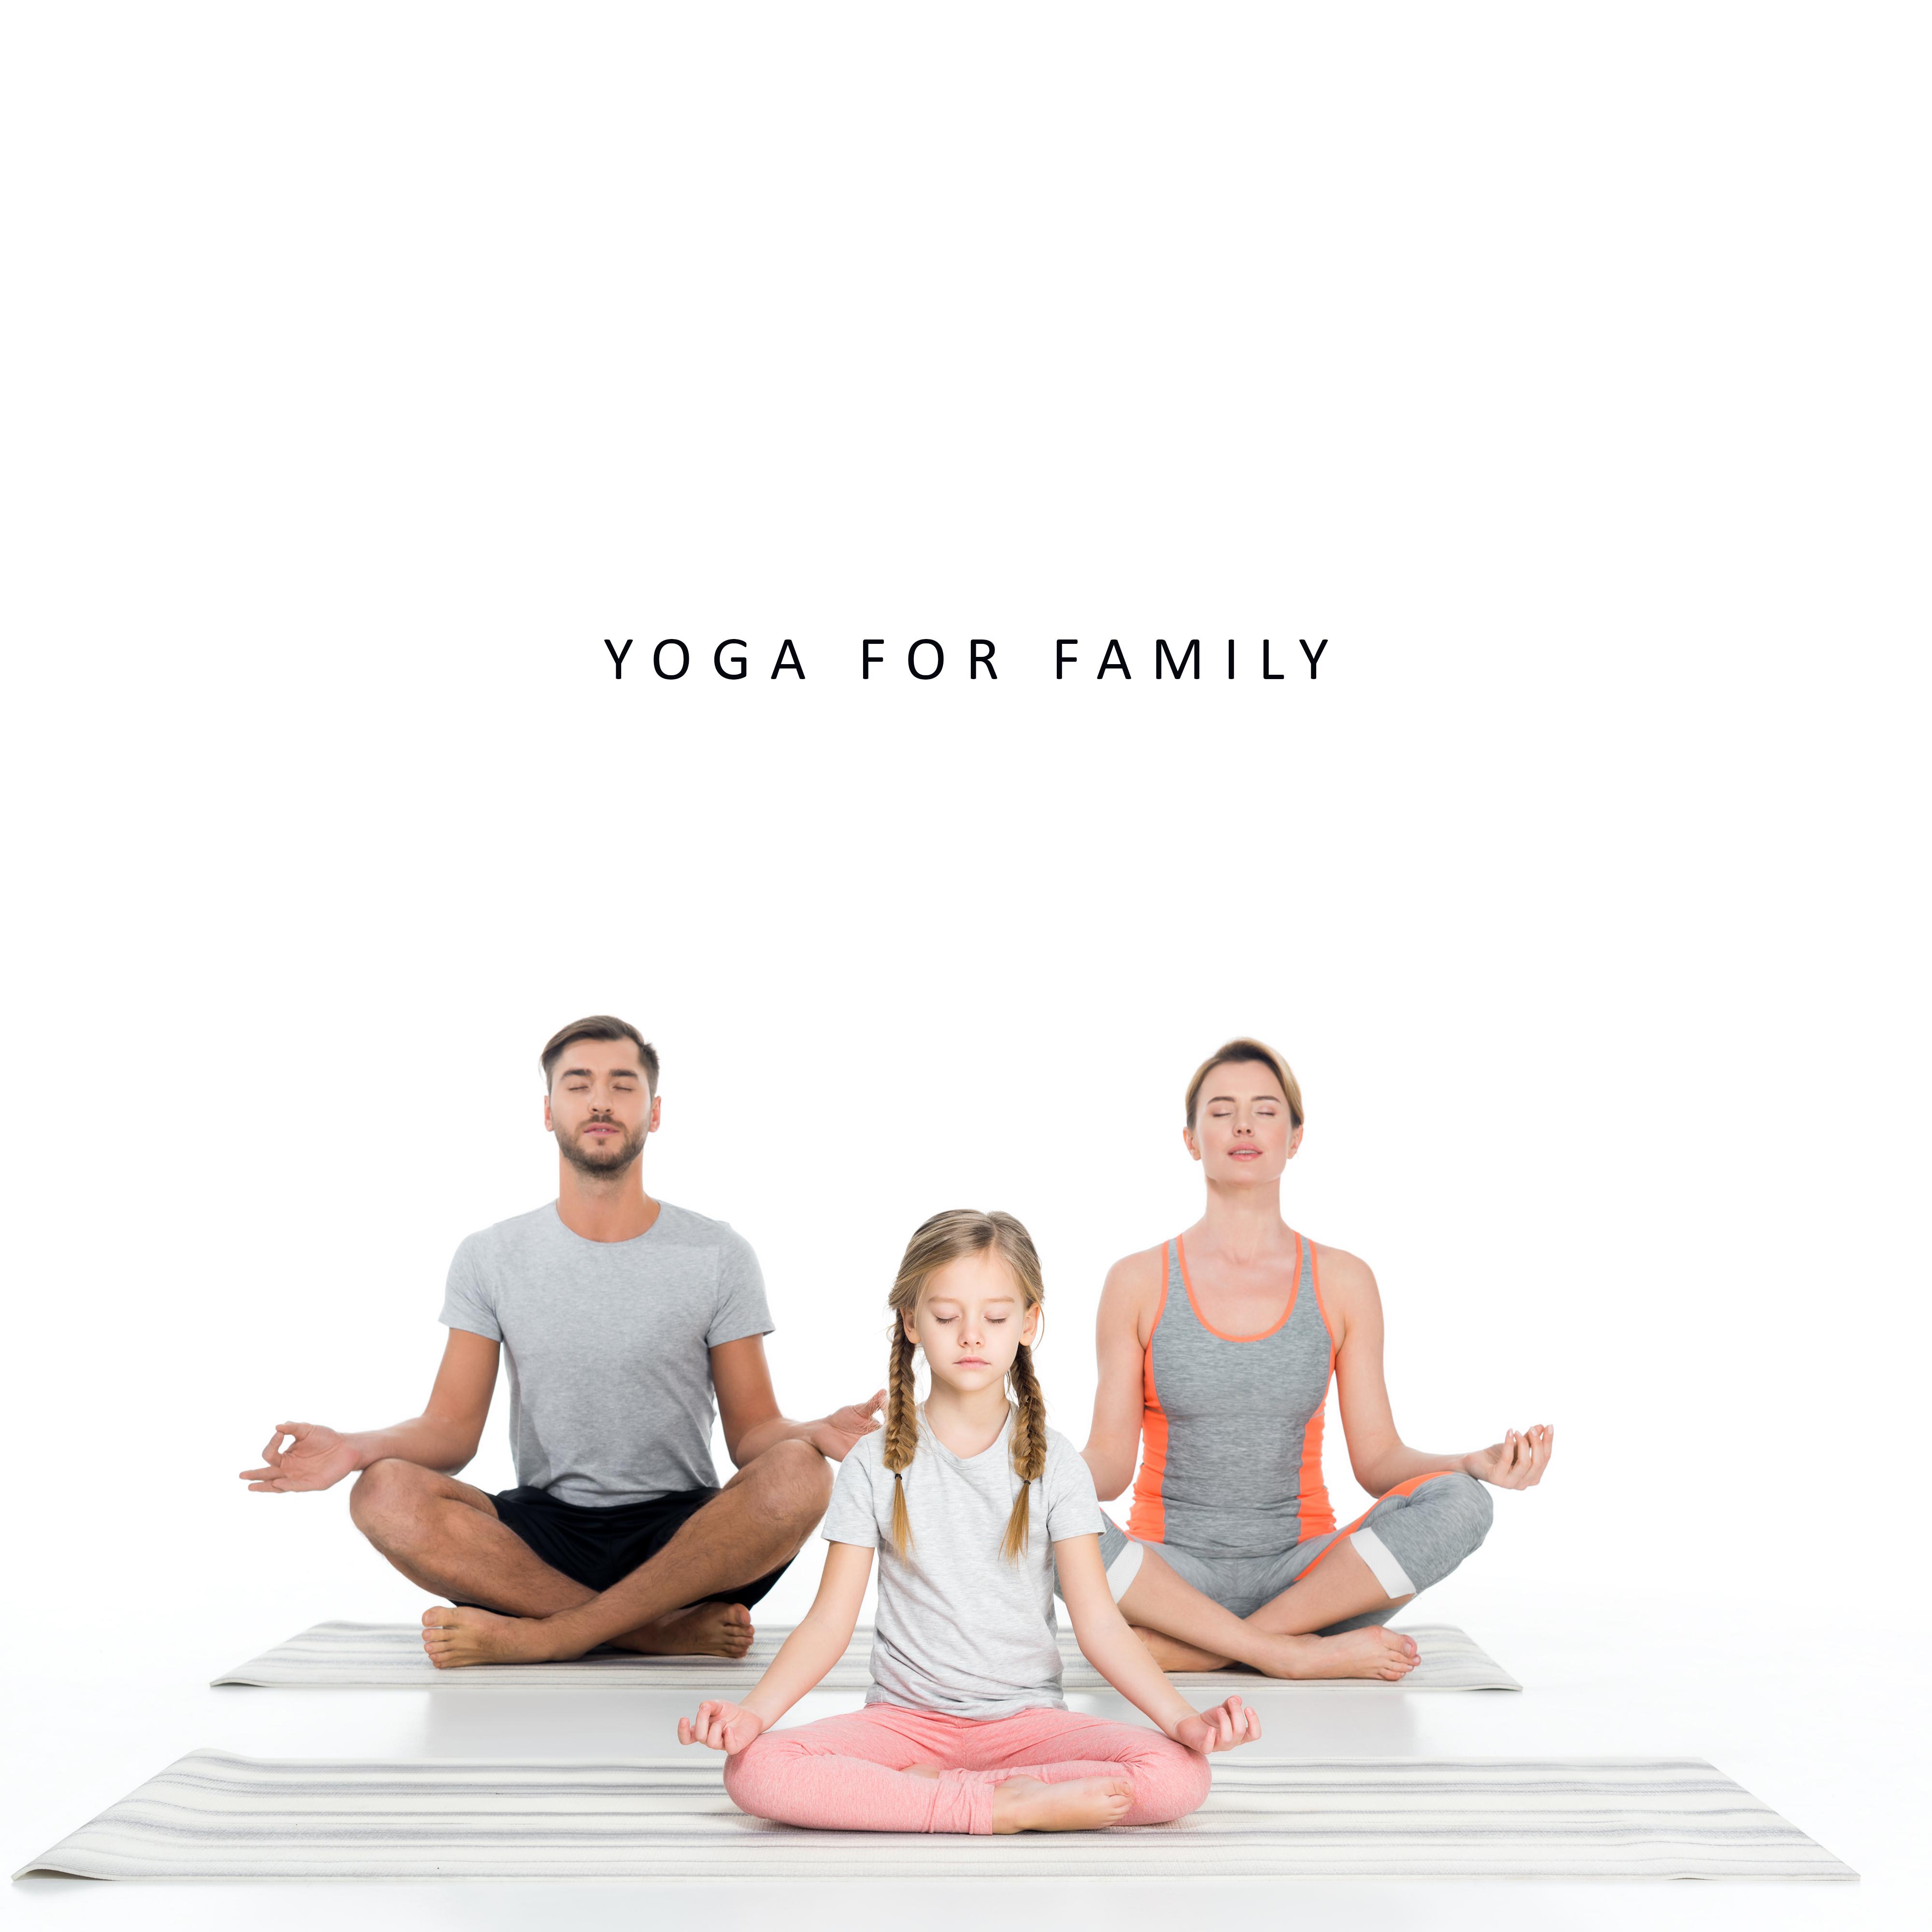 Yoga for Family: Music Background for Yoga for Children or The Whole Family